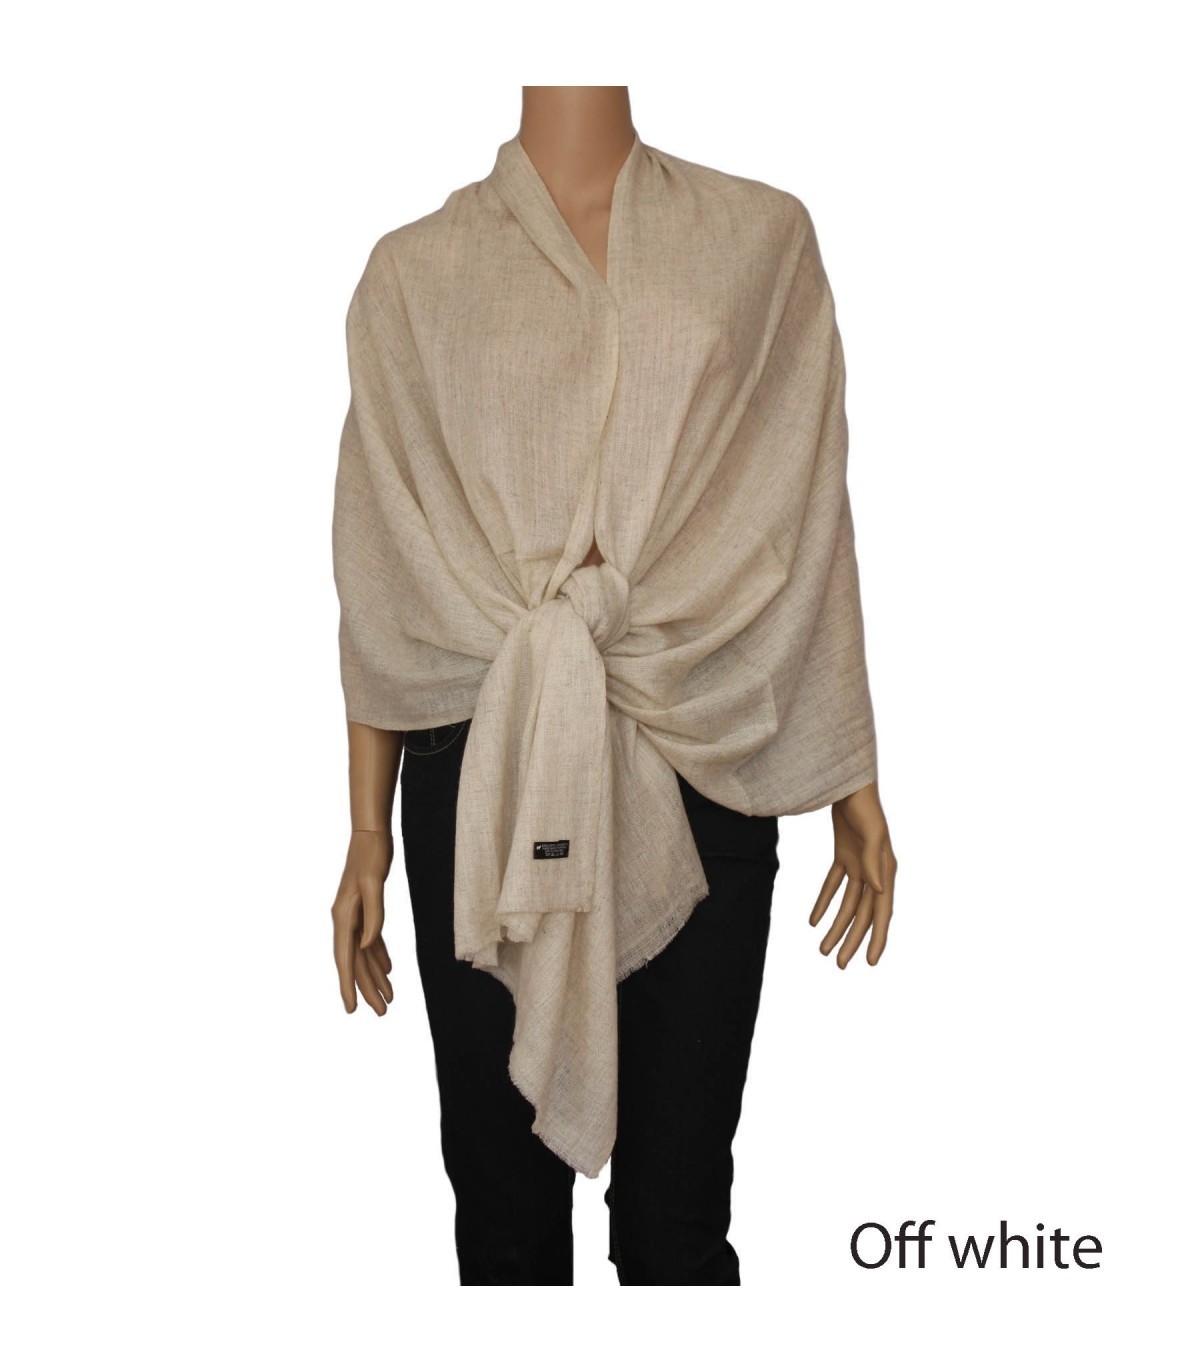 Chic 2ply Off-White cashmere shawls| Nepal Cashmere company